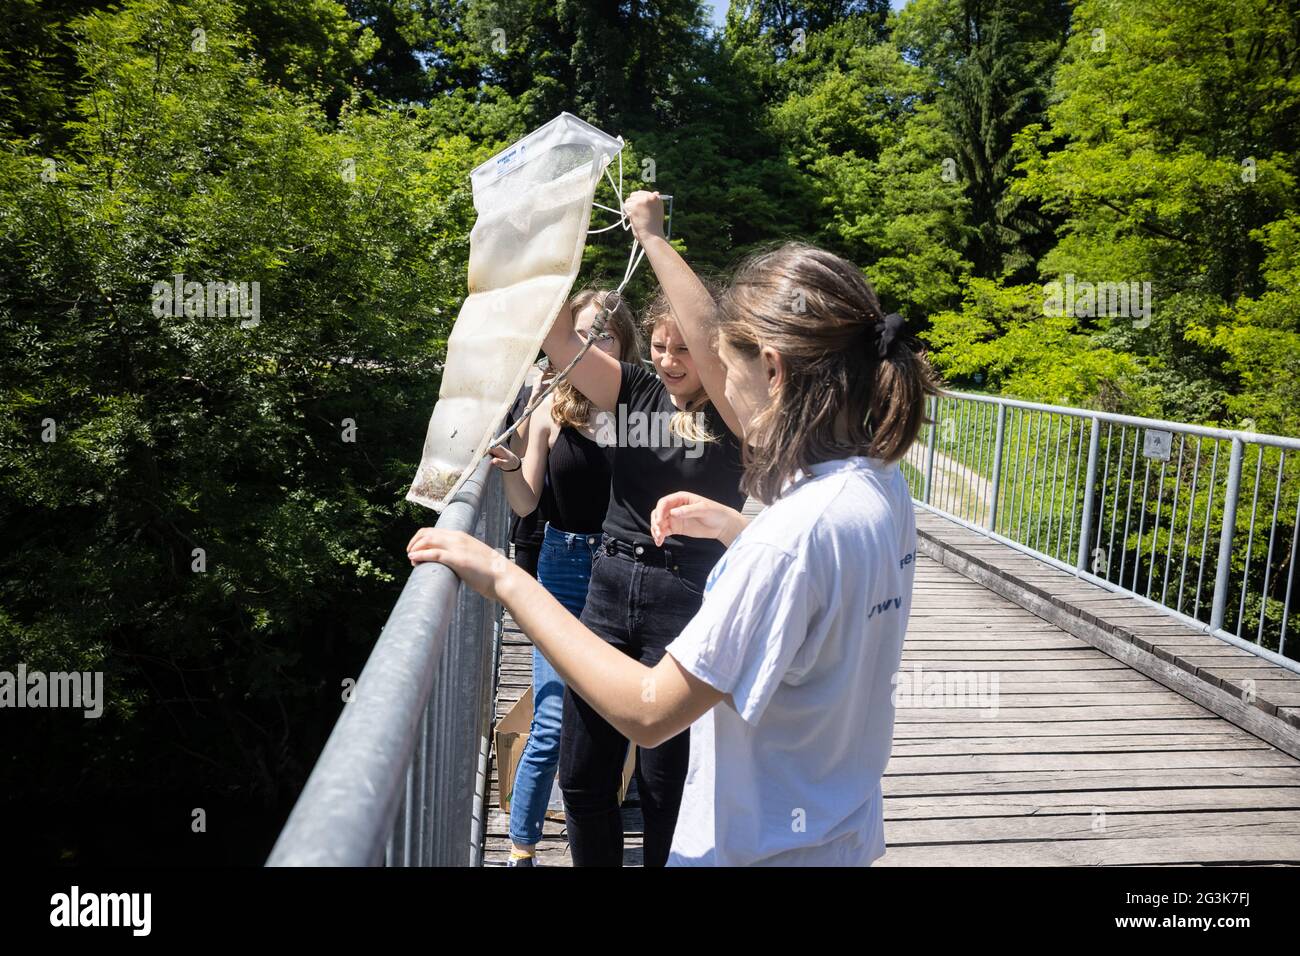 School children pull a net for collecting microplastic from the Kokra river in Kranj, Slovenia, as they participate in the Plastic Pirates - Go Europe! project.The international project Plastic Pirates - Go Europe! is an international citizen science campaign launched by the ministries of education, science and research of Germany, Portugal and Slovenia, which is taking place during their Trio Presidency of the Council of the European Union. It calls upon children and adolescents aged 10 to 16 to investigate waste, particularly plastic waste in and near bodies of water. Stock Photo